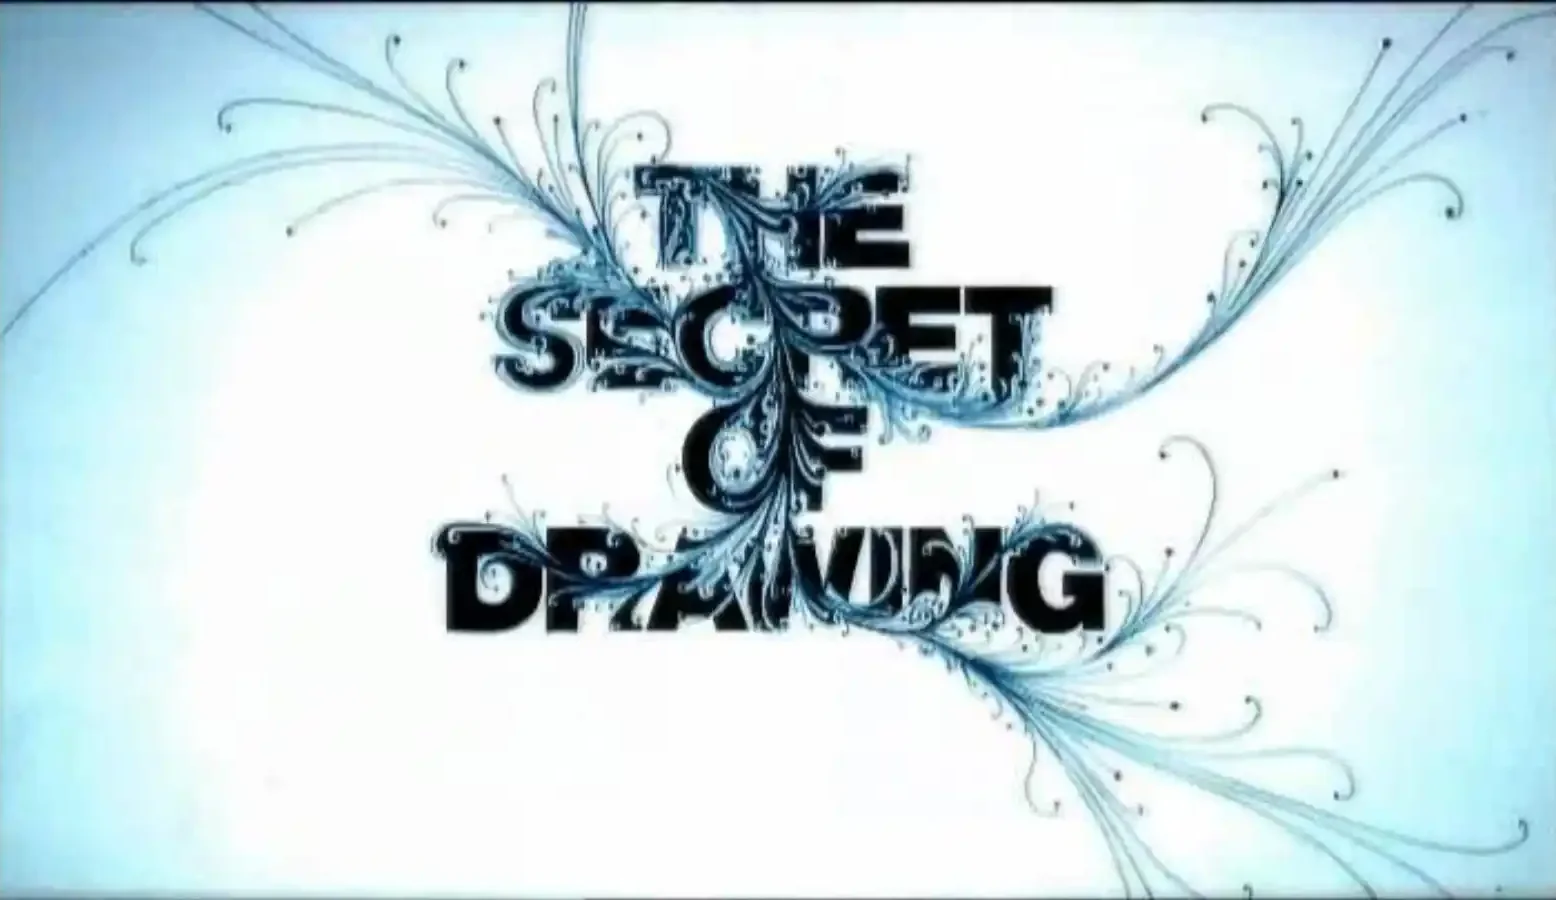 The Secret of Drawing episode 3